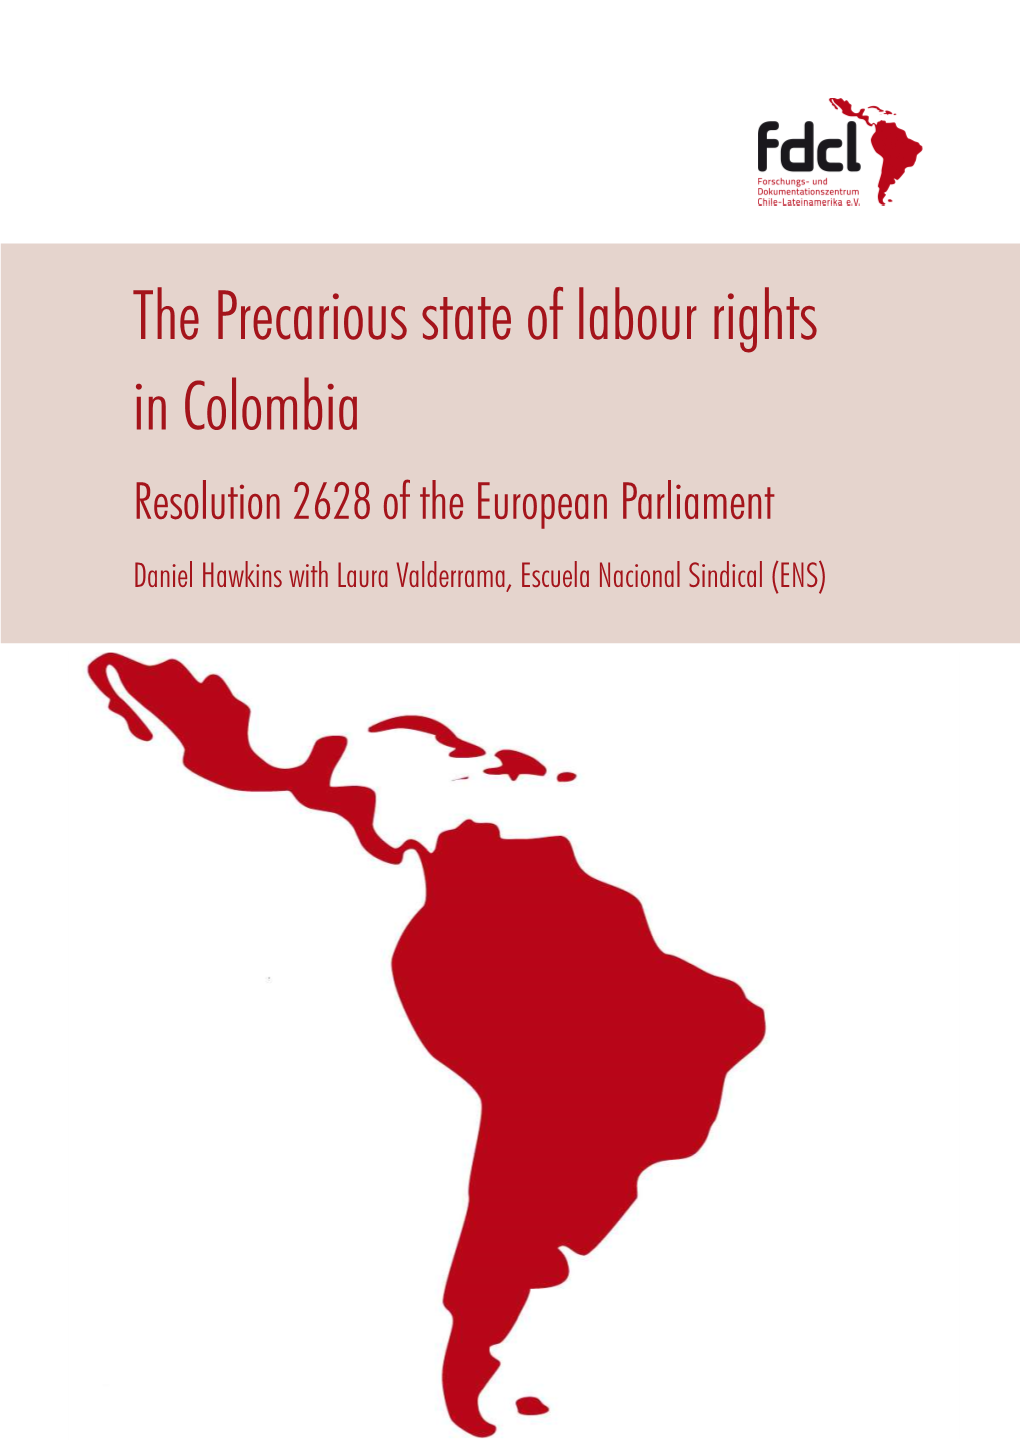 The Precarious State of Labour Rights in Colombia